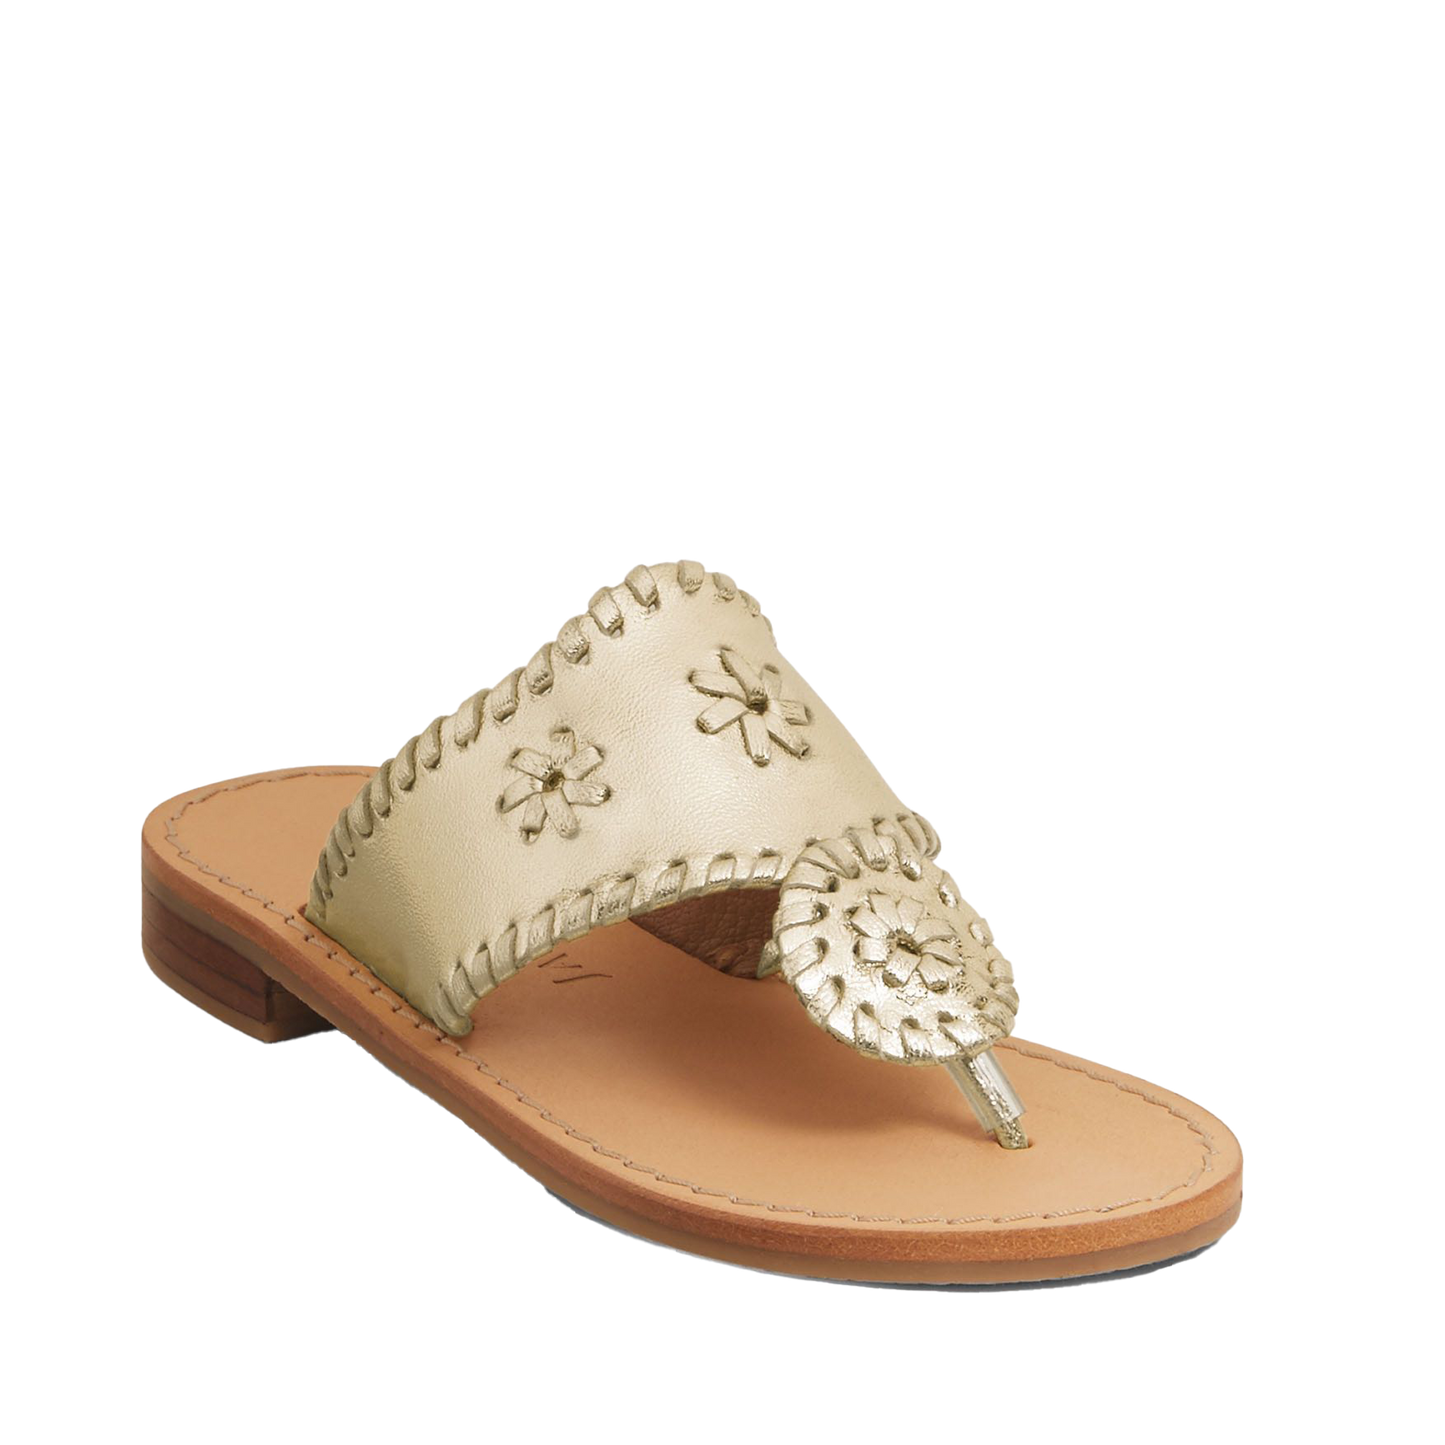 Jacks for your little fashionista! Our Girls Jacks Flat sandal features a leather upper with our signature rondelles and whipstitching. Designed with a gum rubber sole for elements of stability and grip, your mini-me will look adorable in this style.  1" Heel Height Leather Upper Leather Lining Rubber Sole